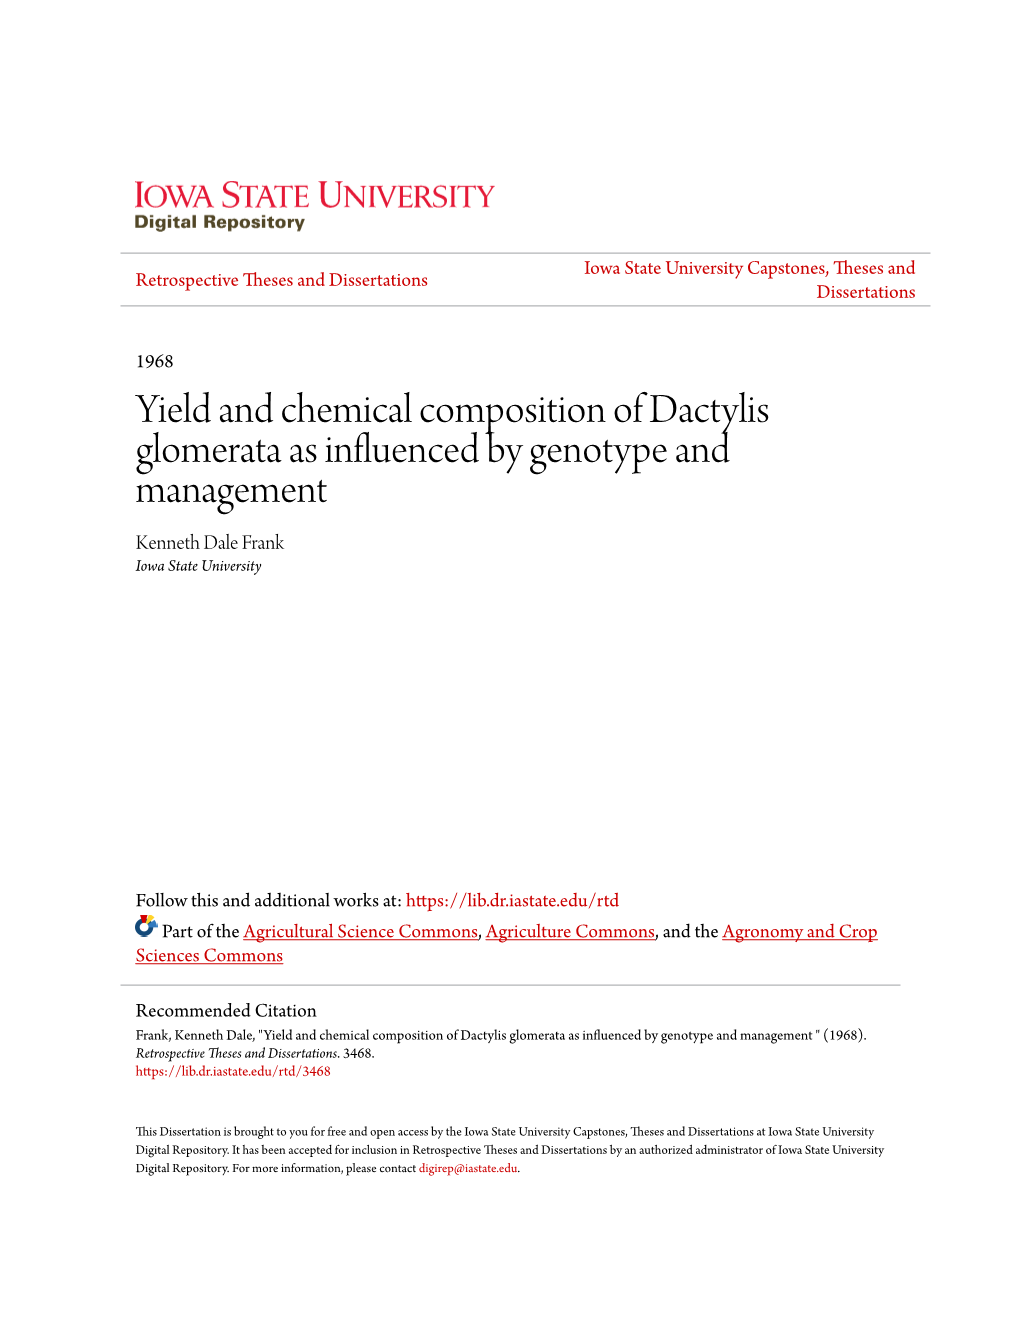 Yield and Chemical Composition of Dactylis Glomerata As Influenced by Genotype and Management Kenneth Dale Frank Iowa State University